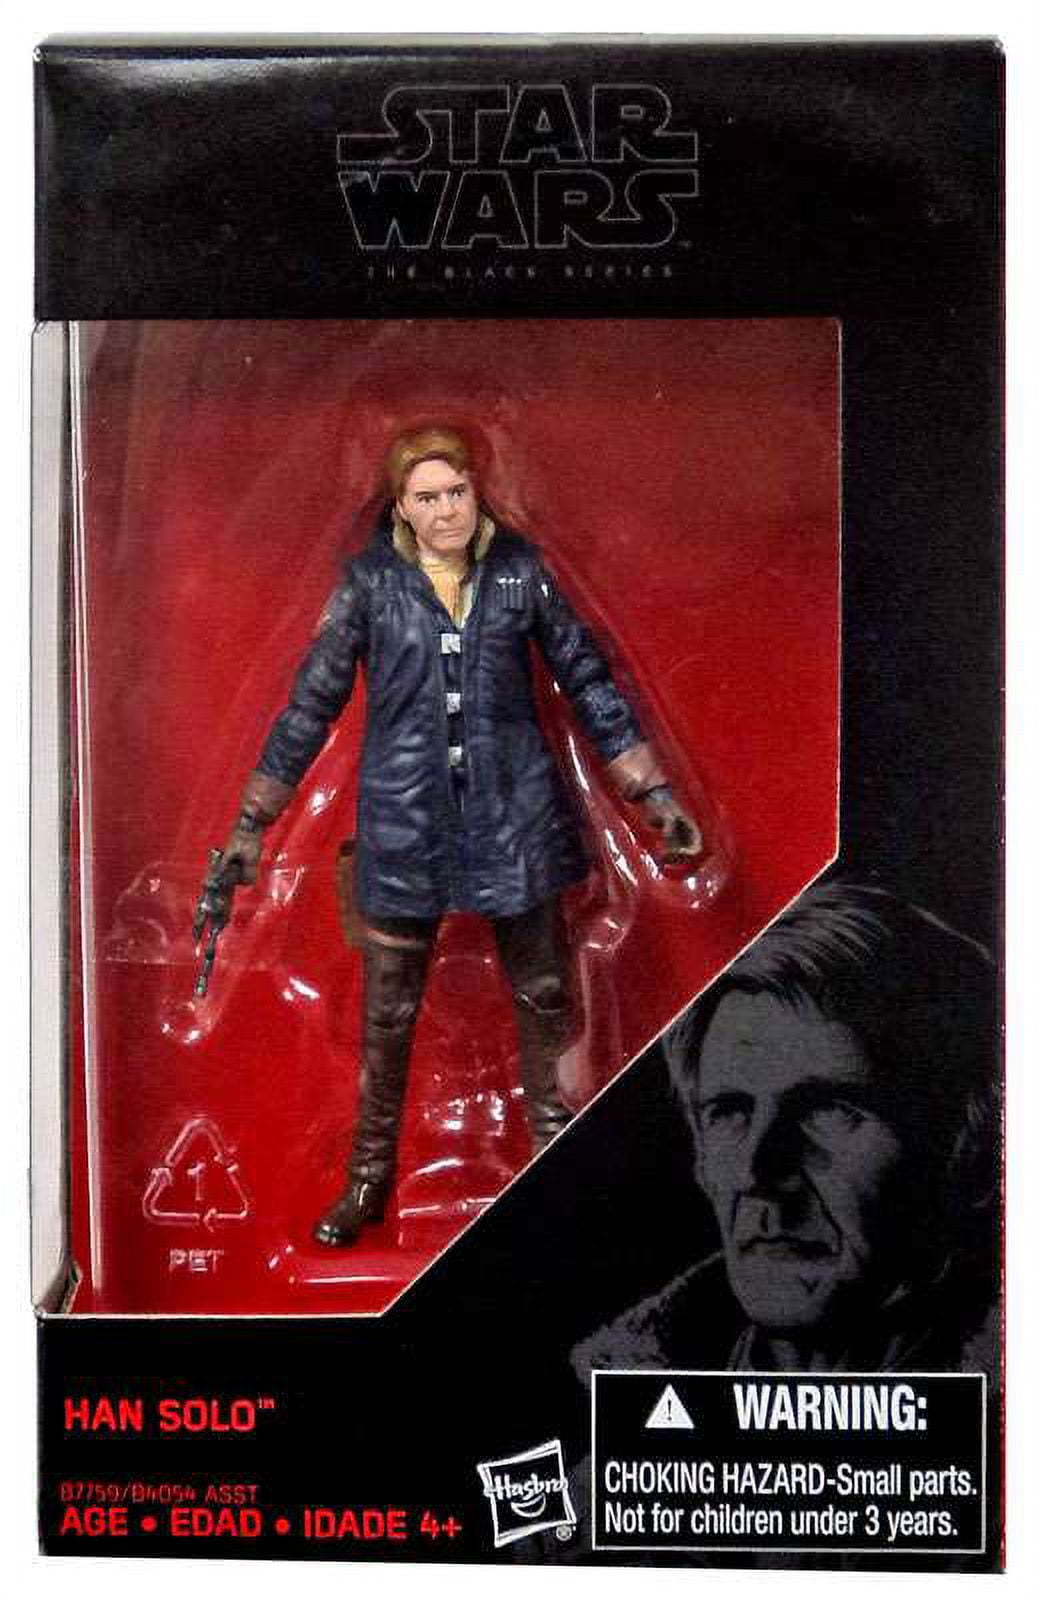 Star Wars:The Force Awakens, theBlack Series, Han Solo [Starkiller Base]  Action Figure, 3.75 Inches 